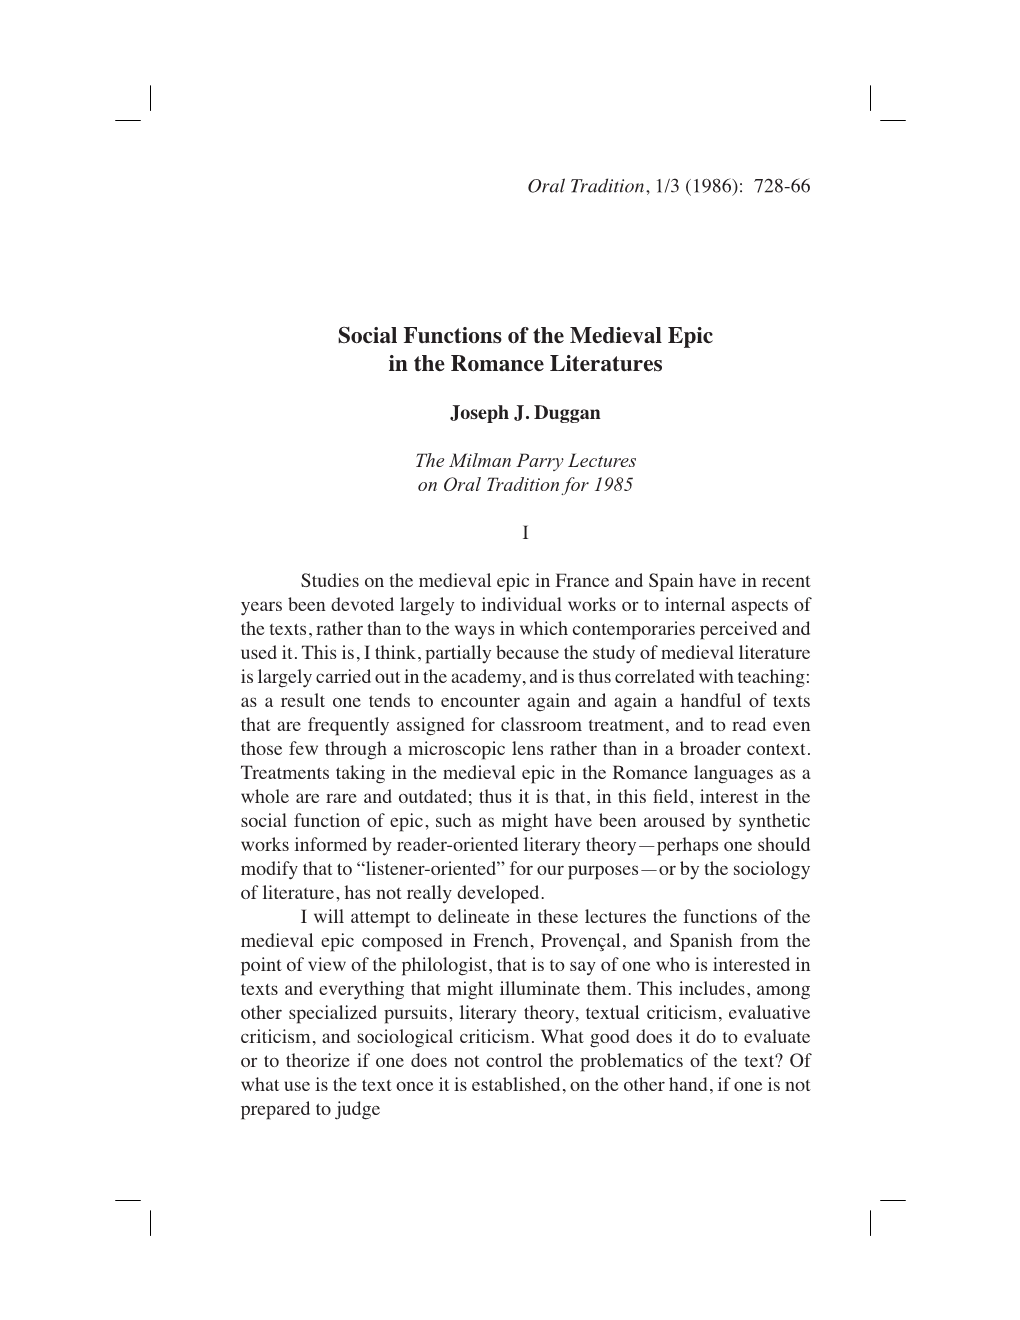 Social Functions of the Medieval Epic in the Romance Literatures